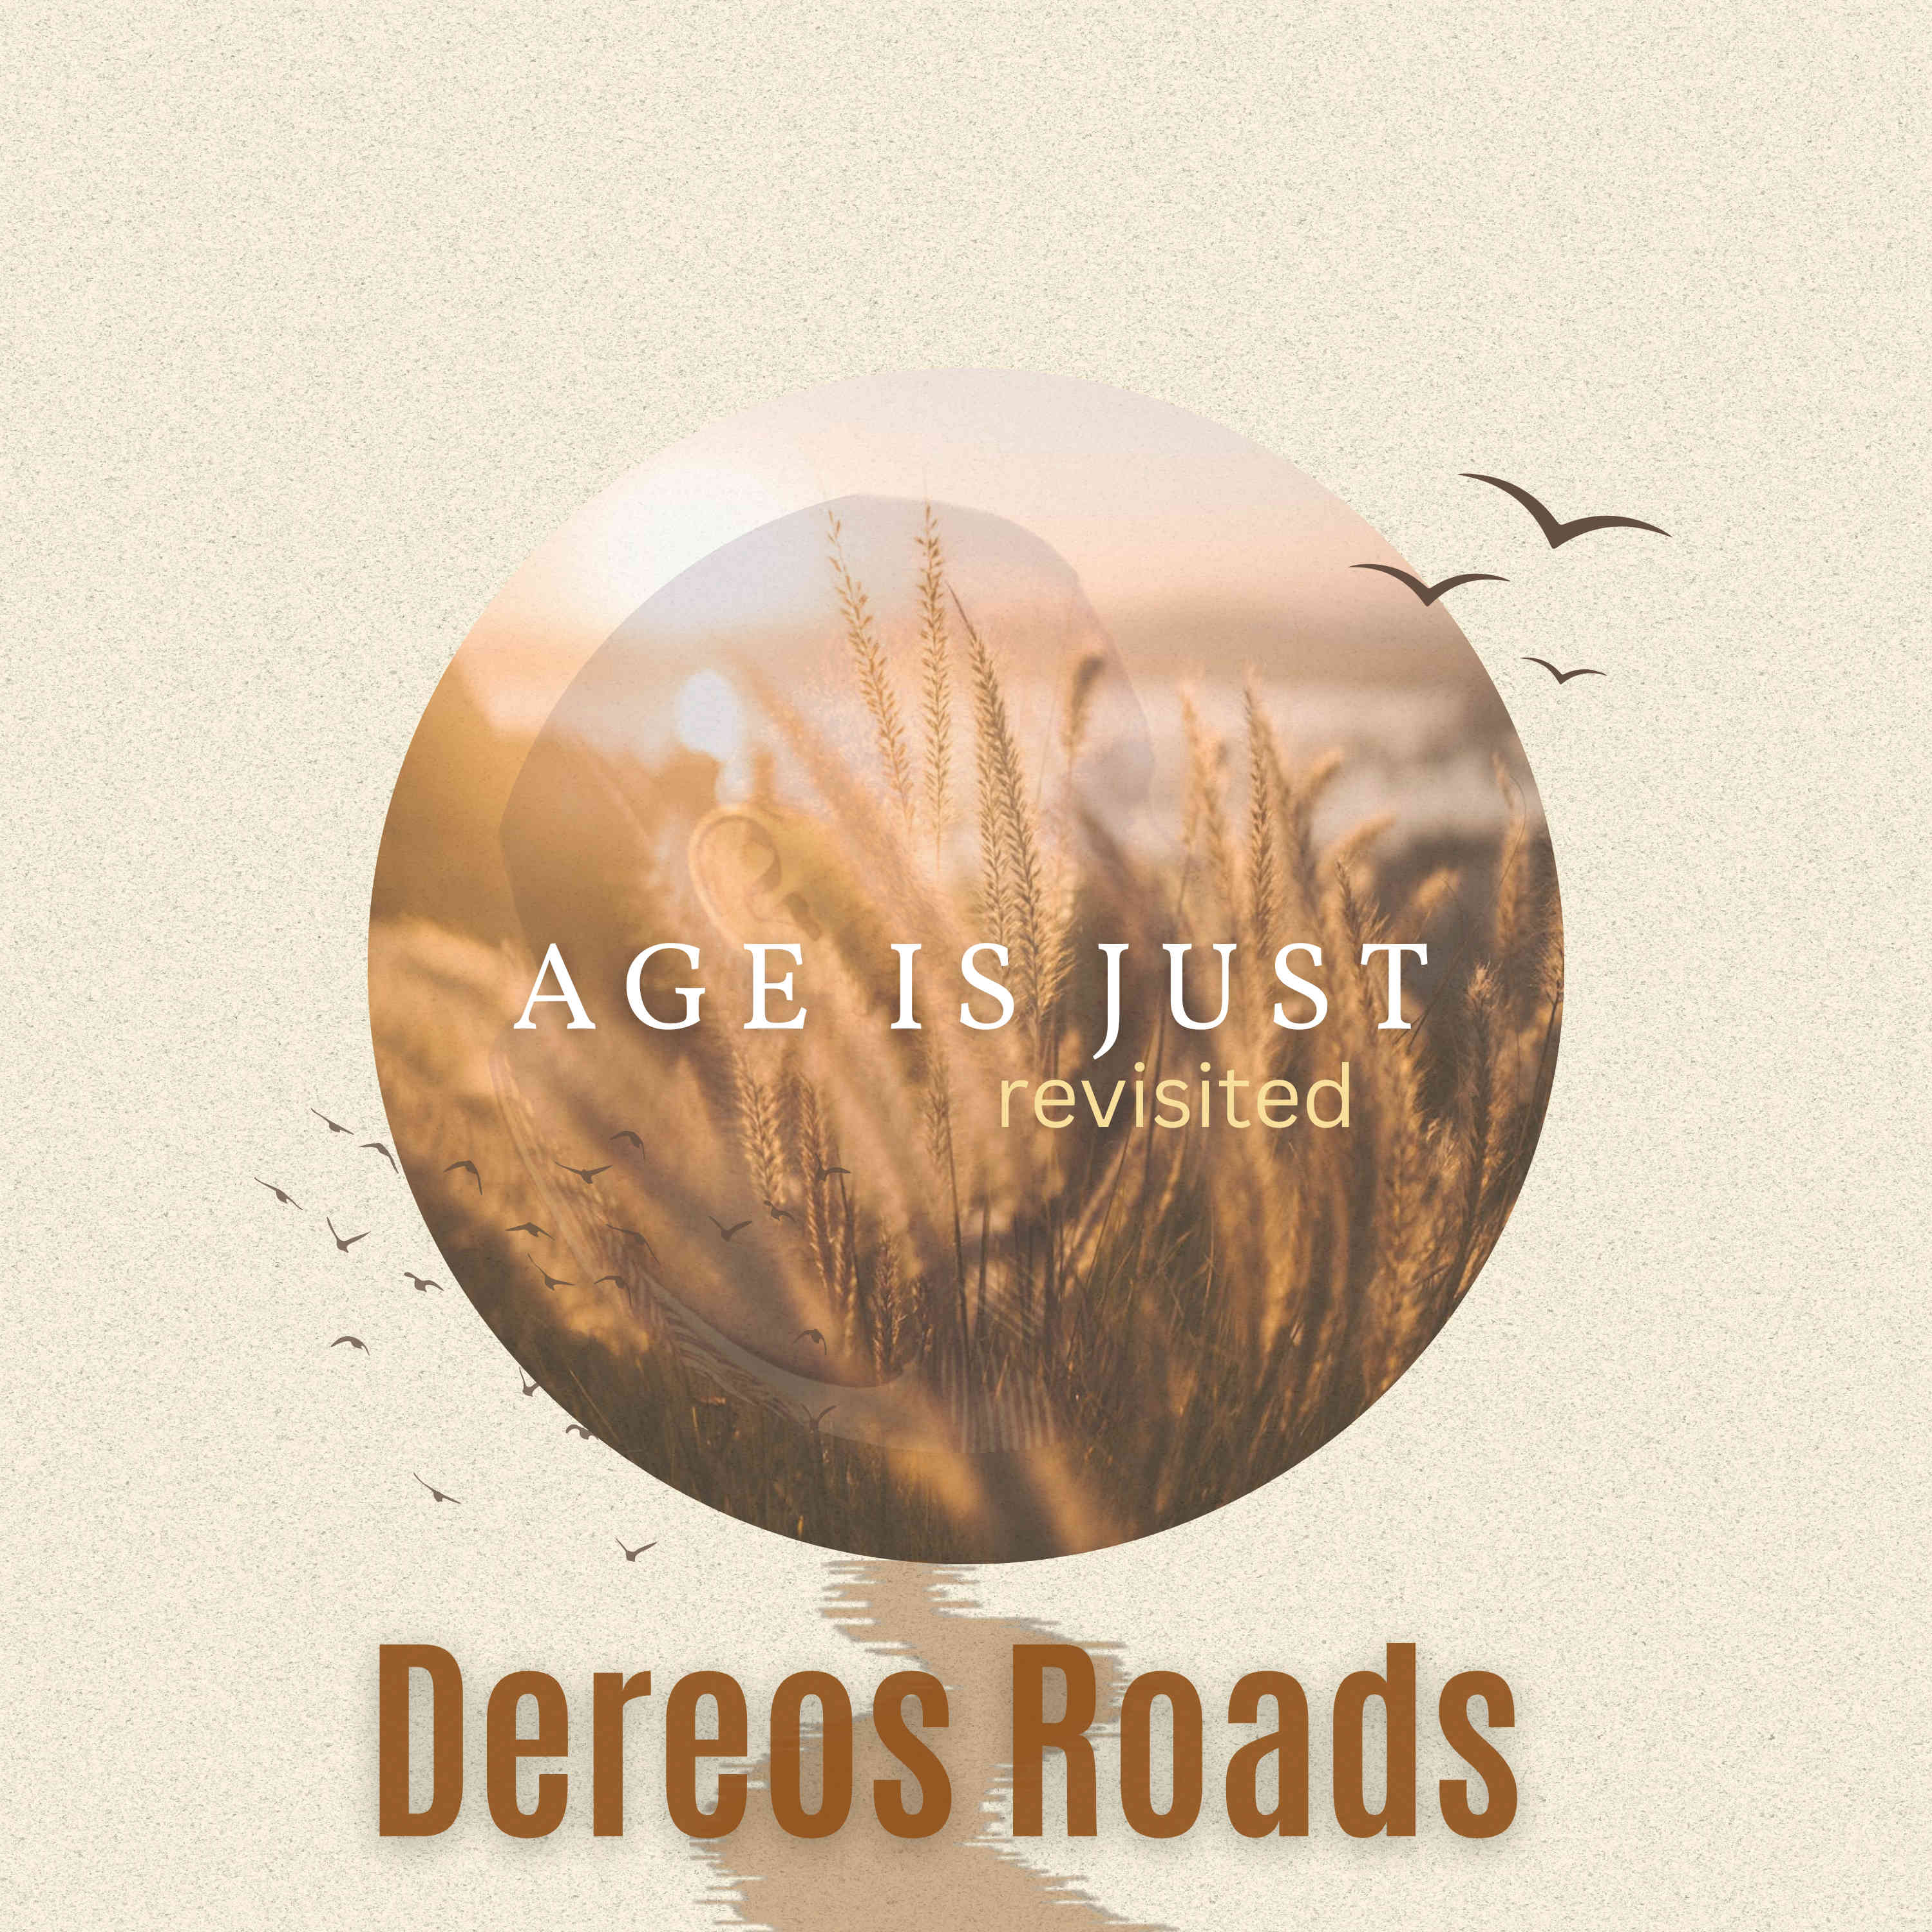 Dereos Roads “Age is Just (Revisited)” Artwork Visual